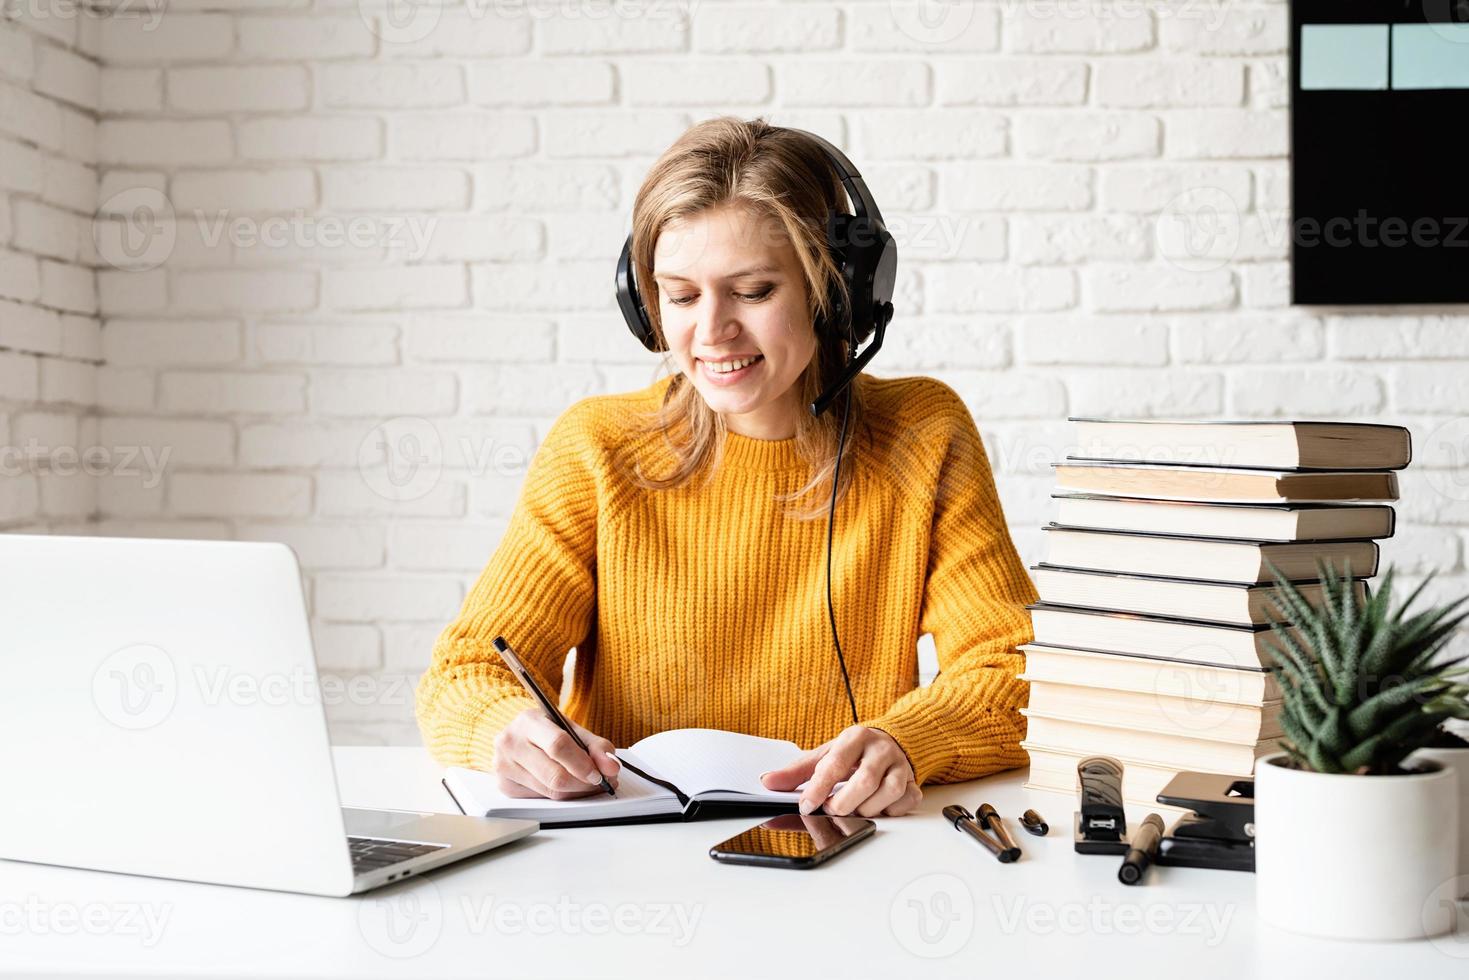 Young woman in black headphones studying online using laptop photo